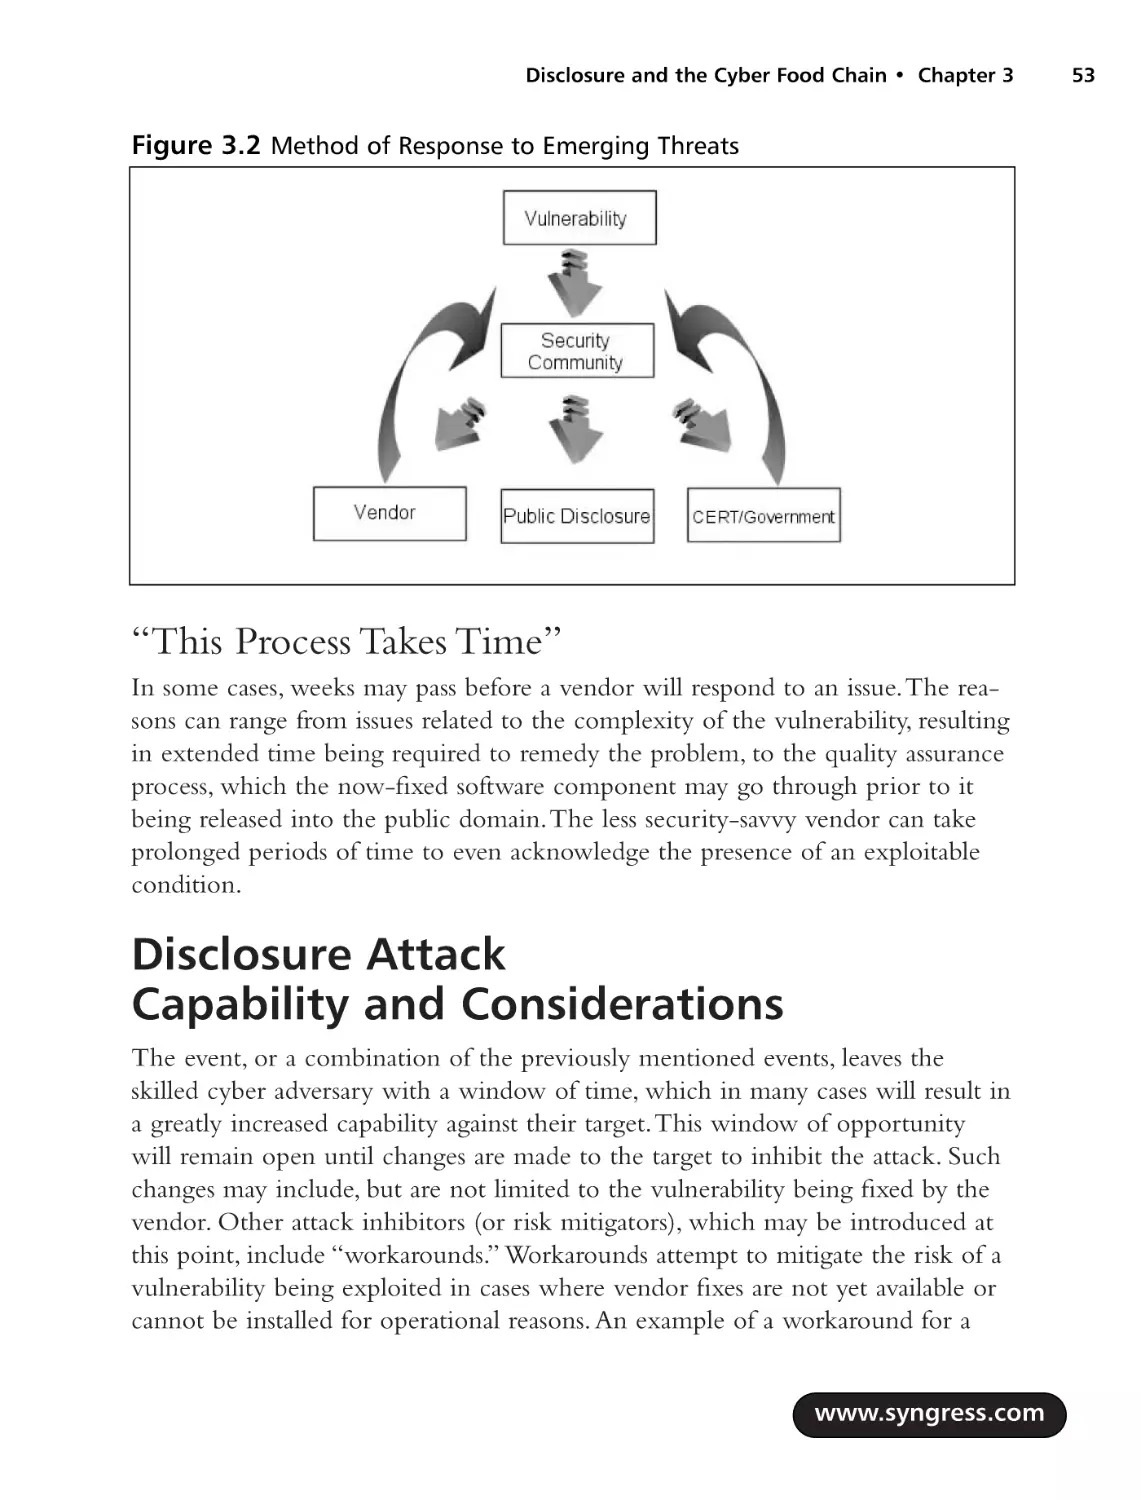 "This Process Takes Time"
Disclosure Attack Capability and Considerations